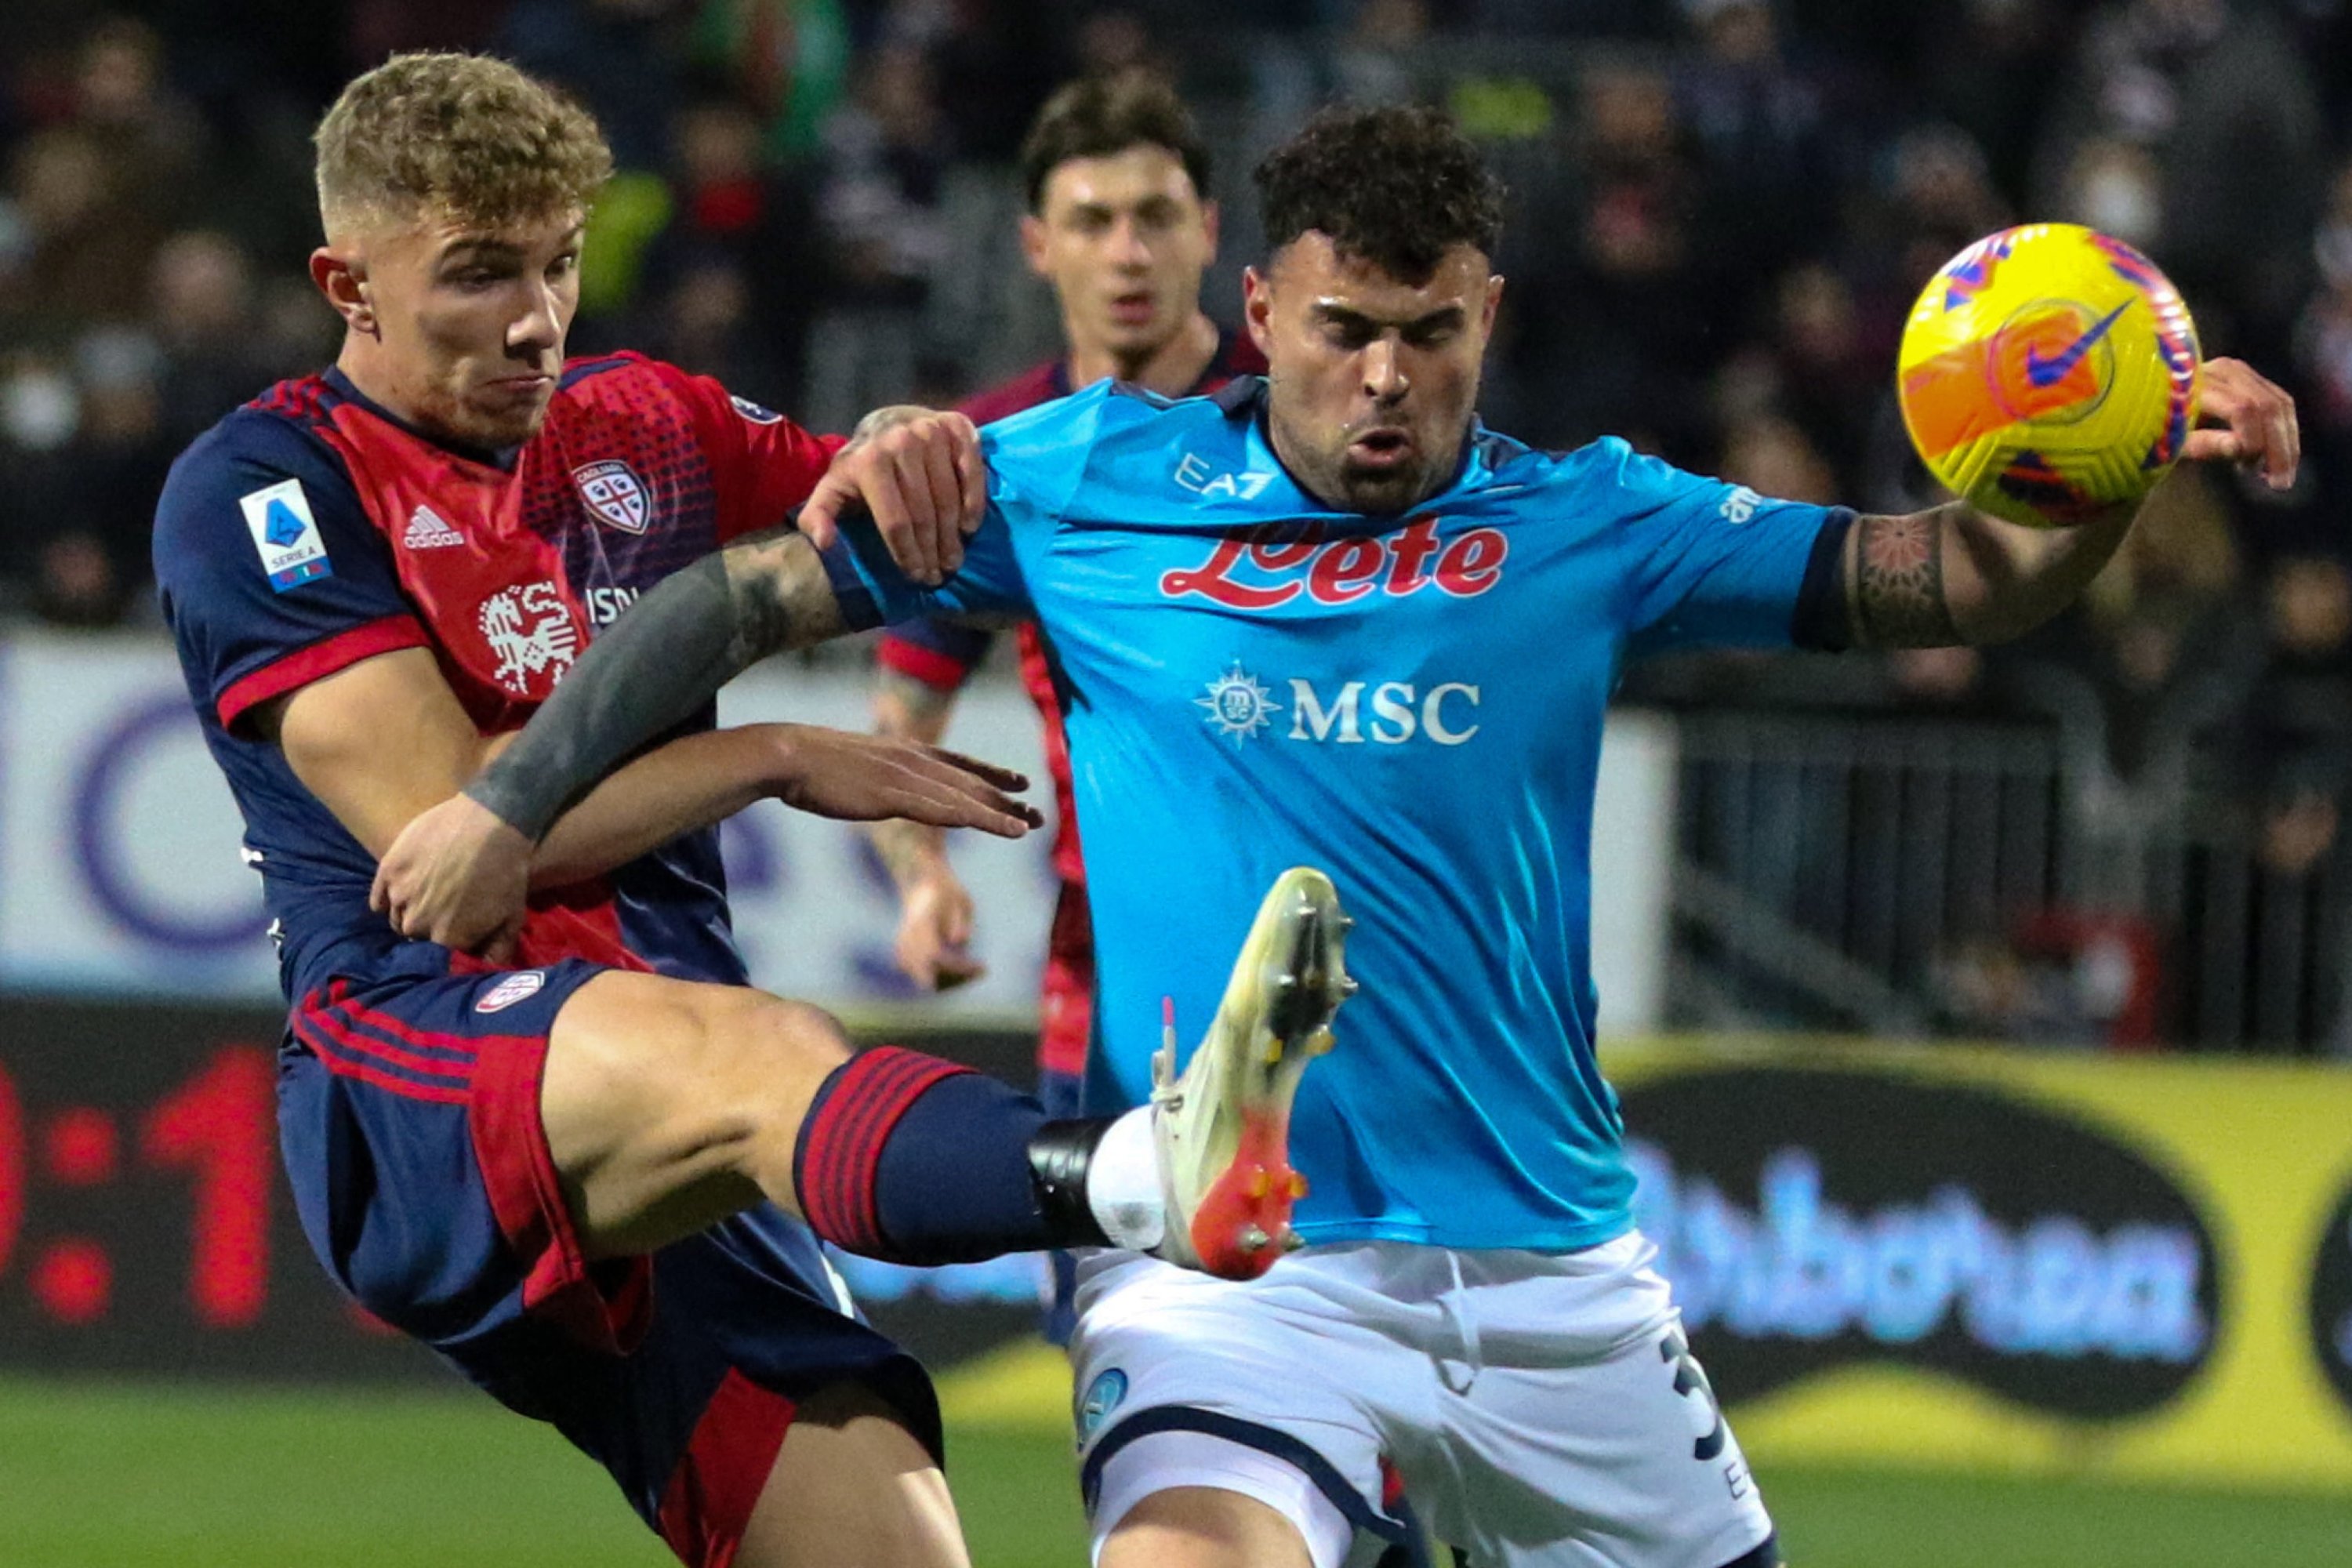 Alessandro Deiola of Cagliari in action during the Serie A match